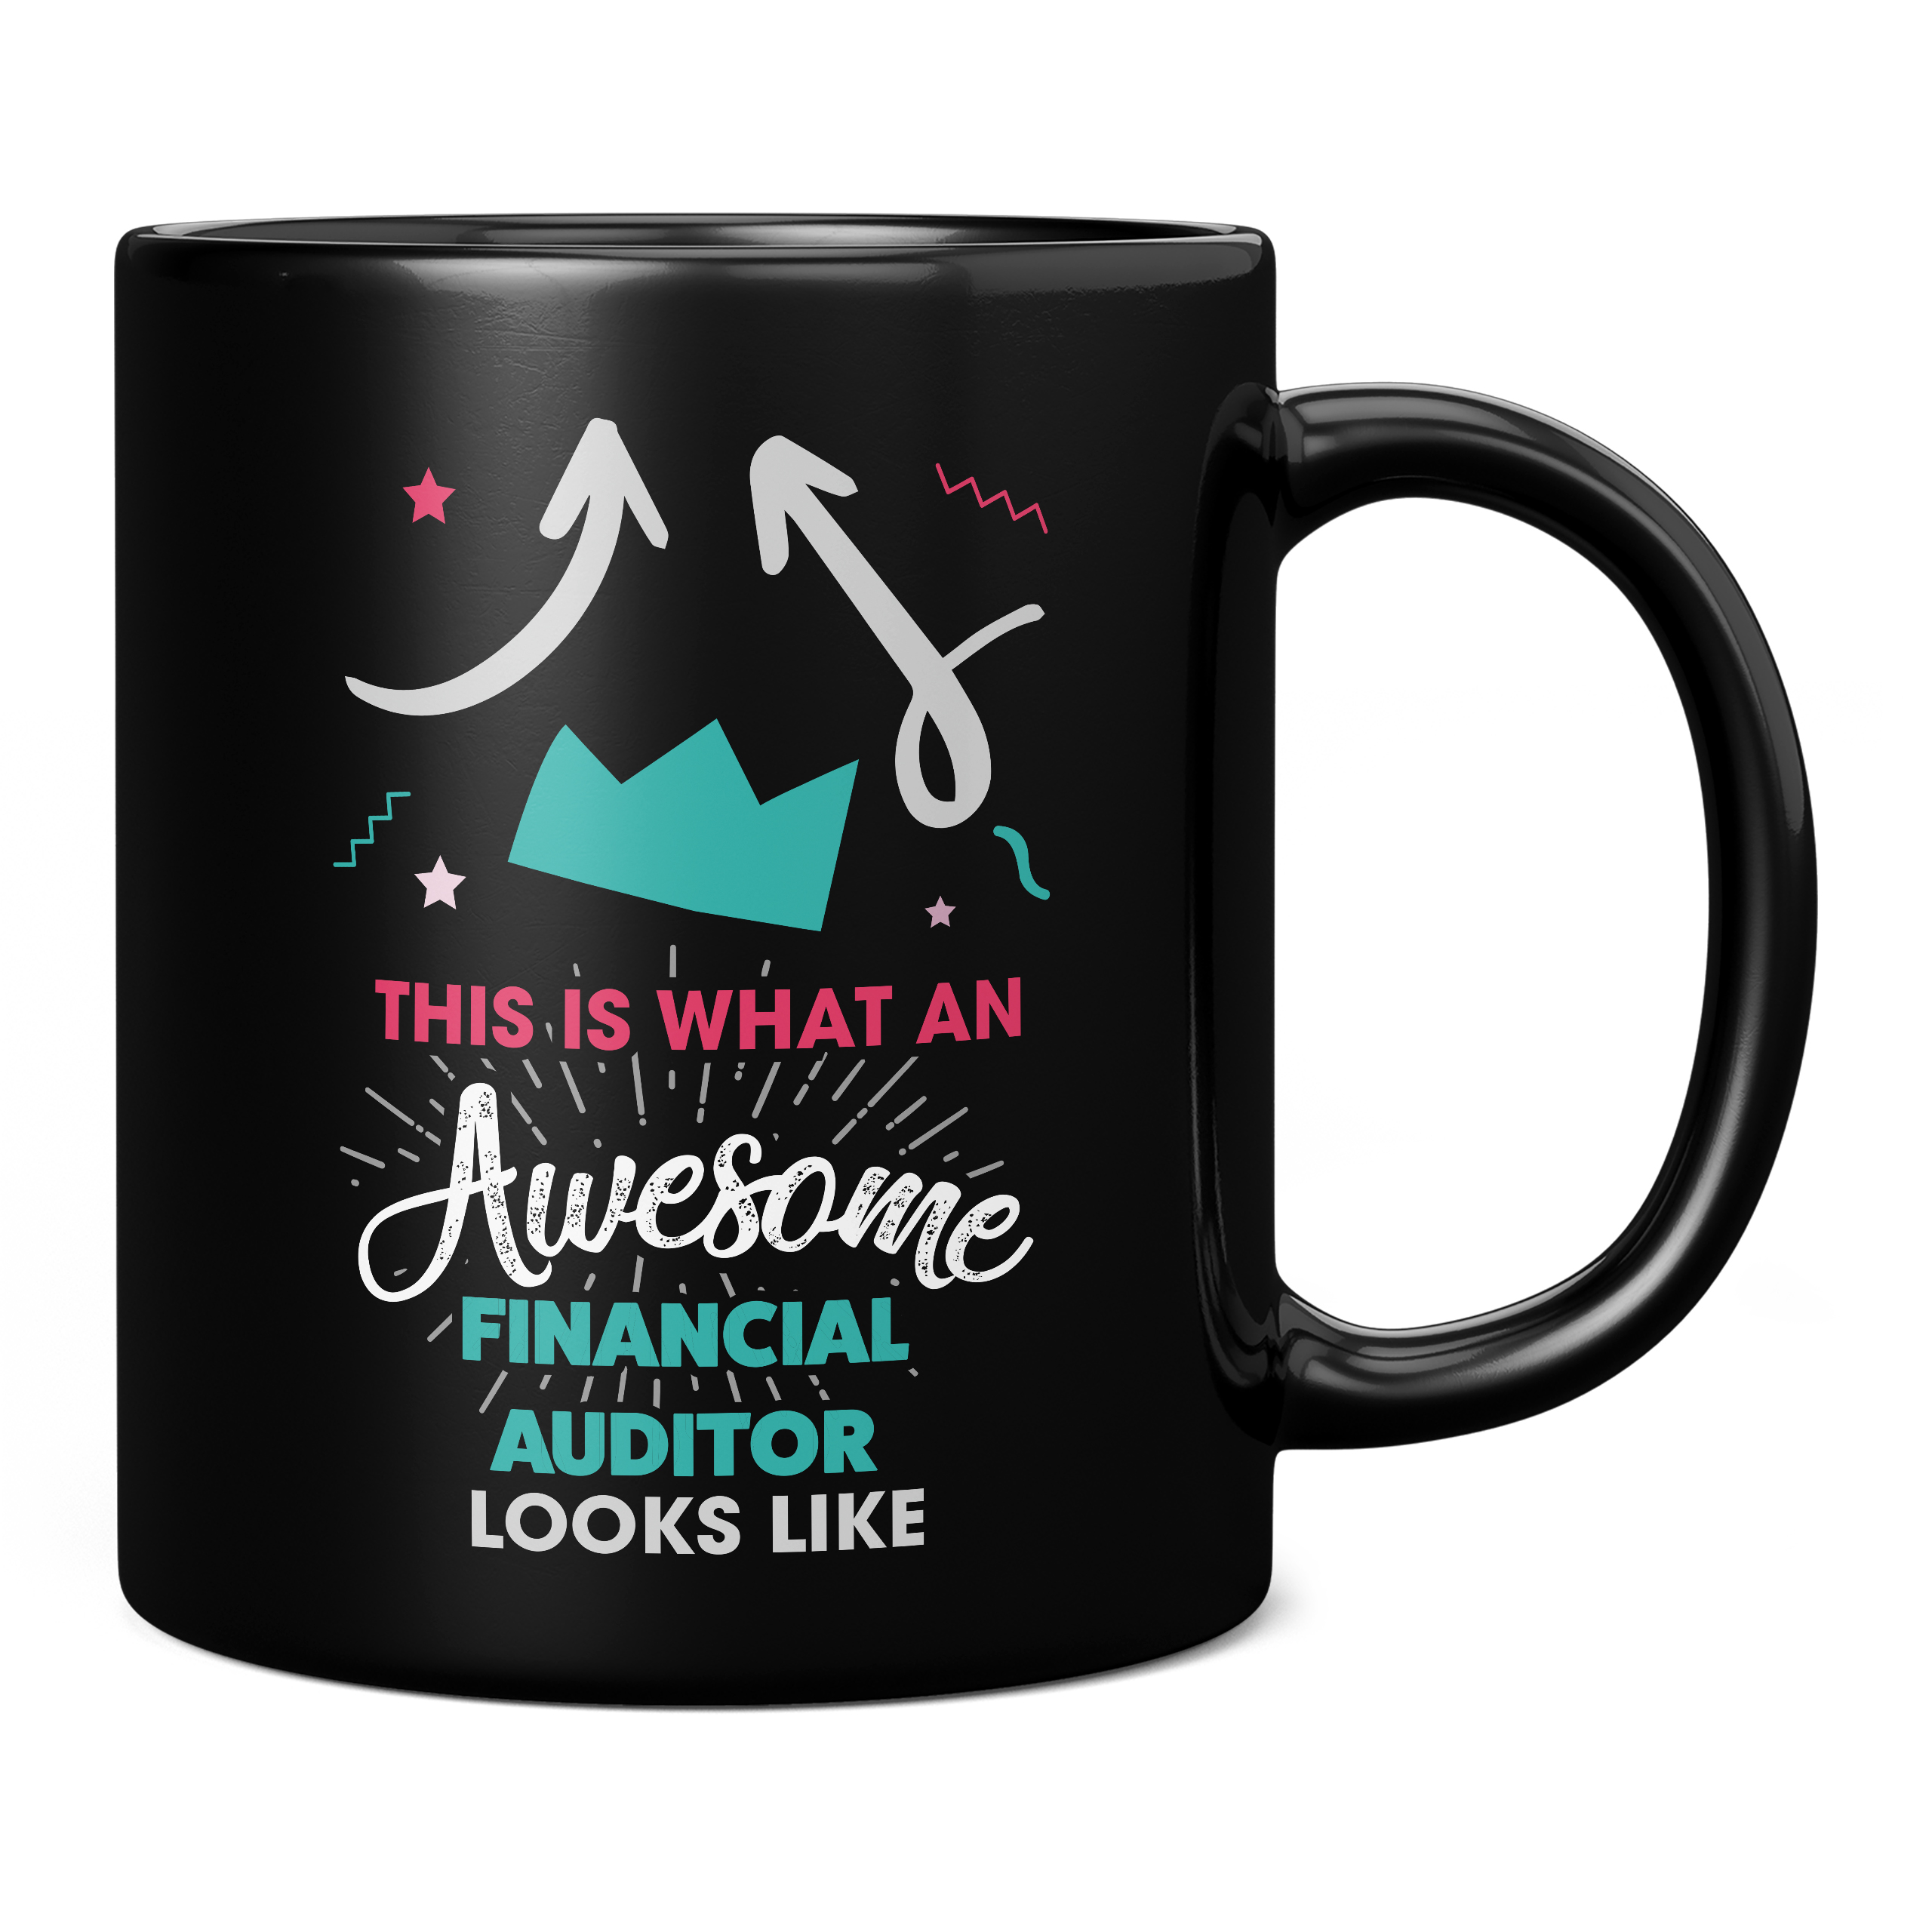 THIS IS WHAT AN AWESOME FINANCIAL AUDITOR LOOKS LIKE 11OZ NOVELTY MUG